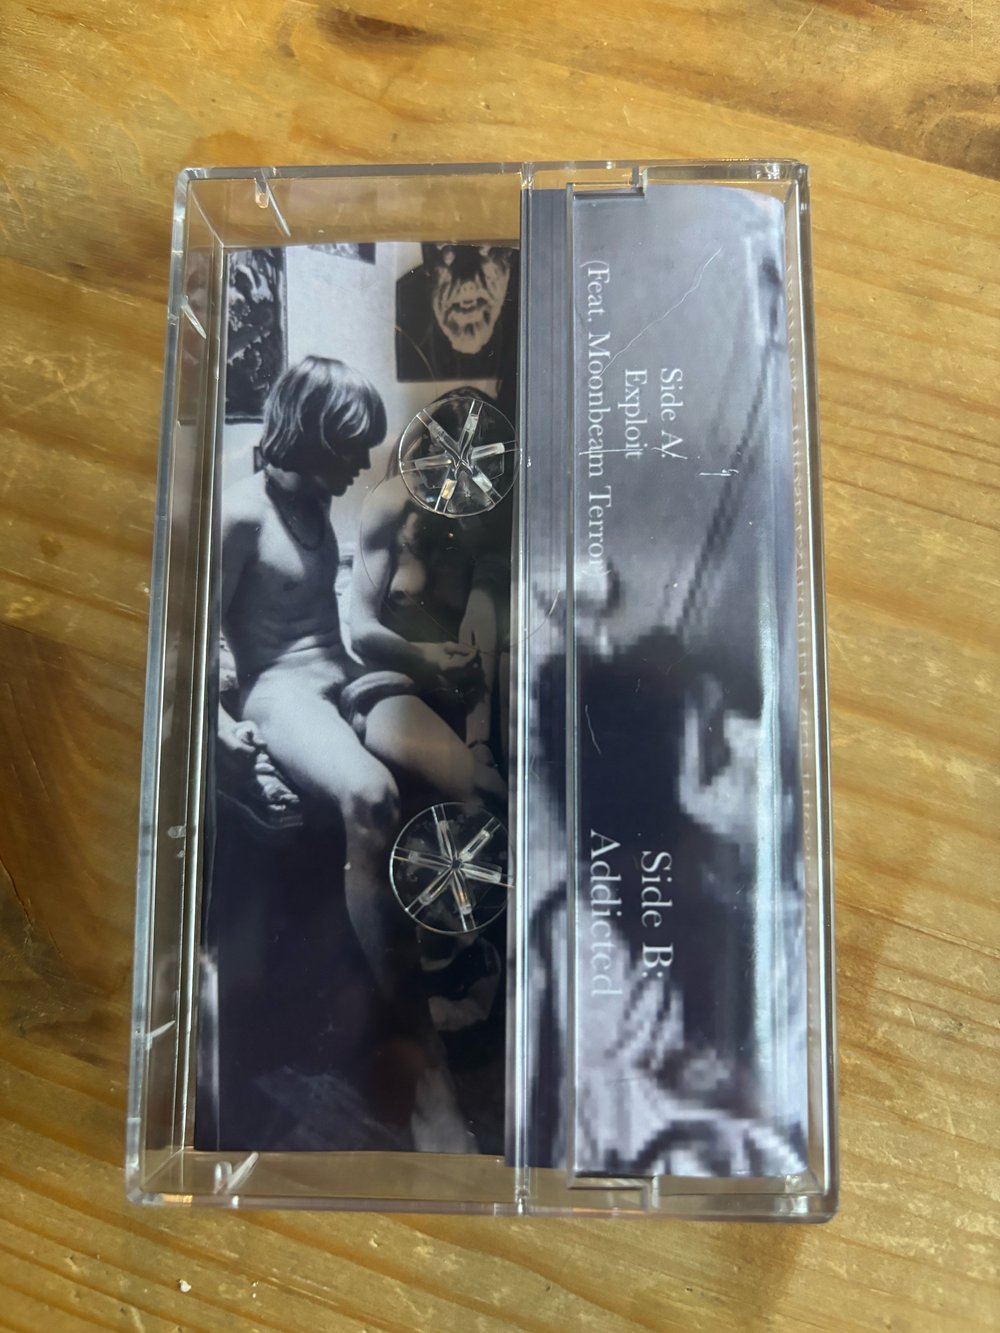 Fistfuck - Those Exploited Are Those Addicted Cassette Reissue